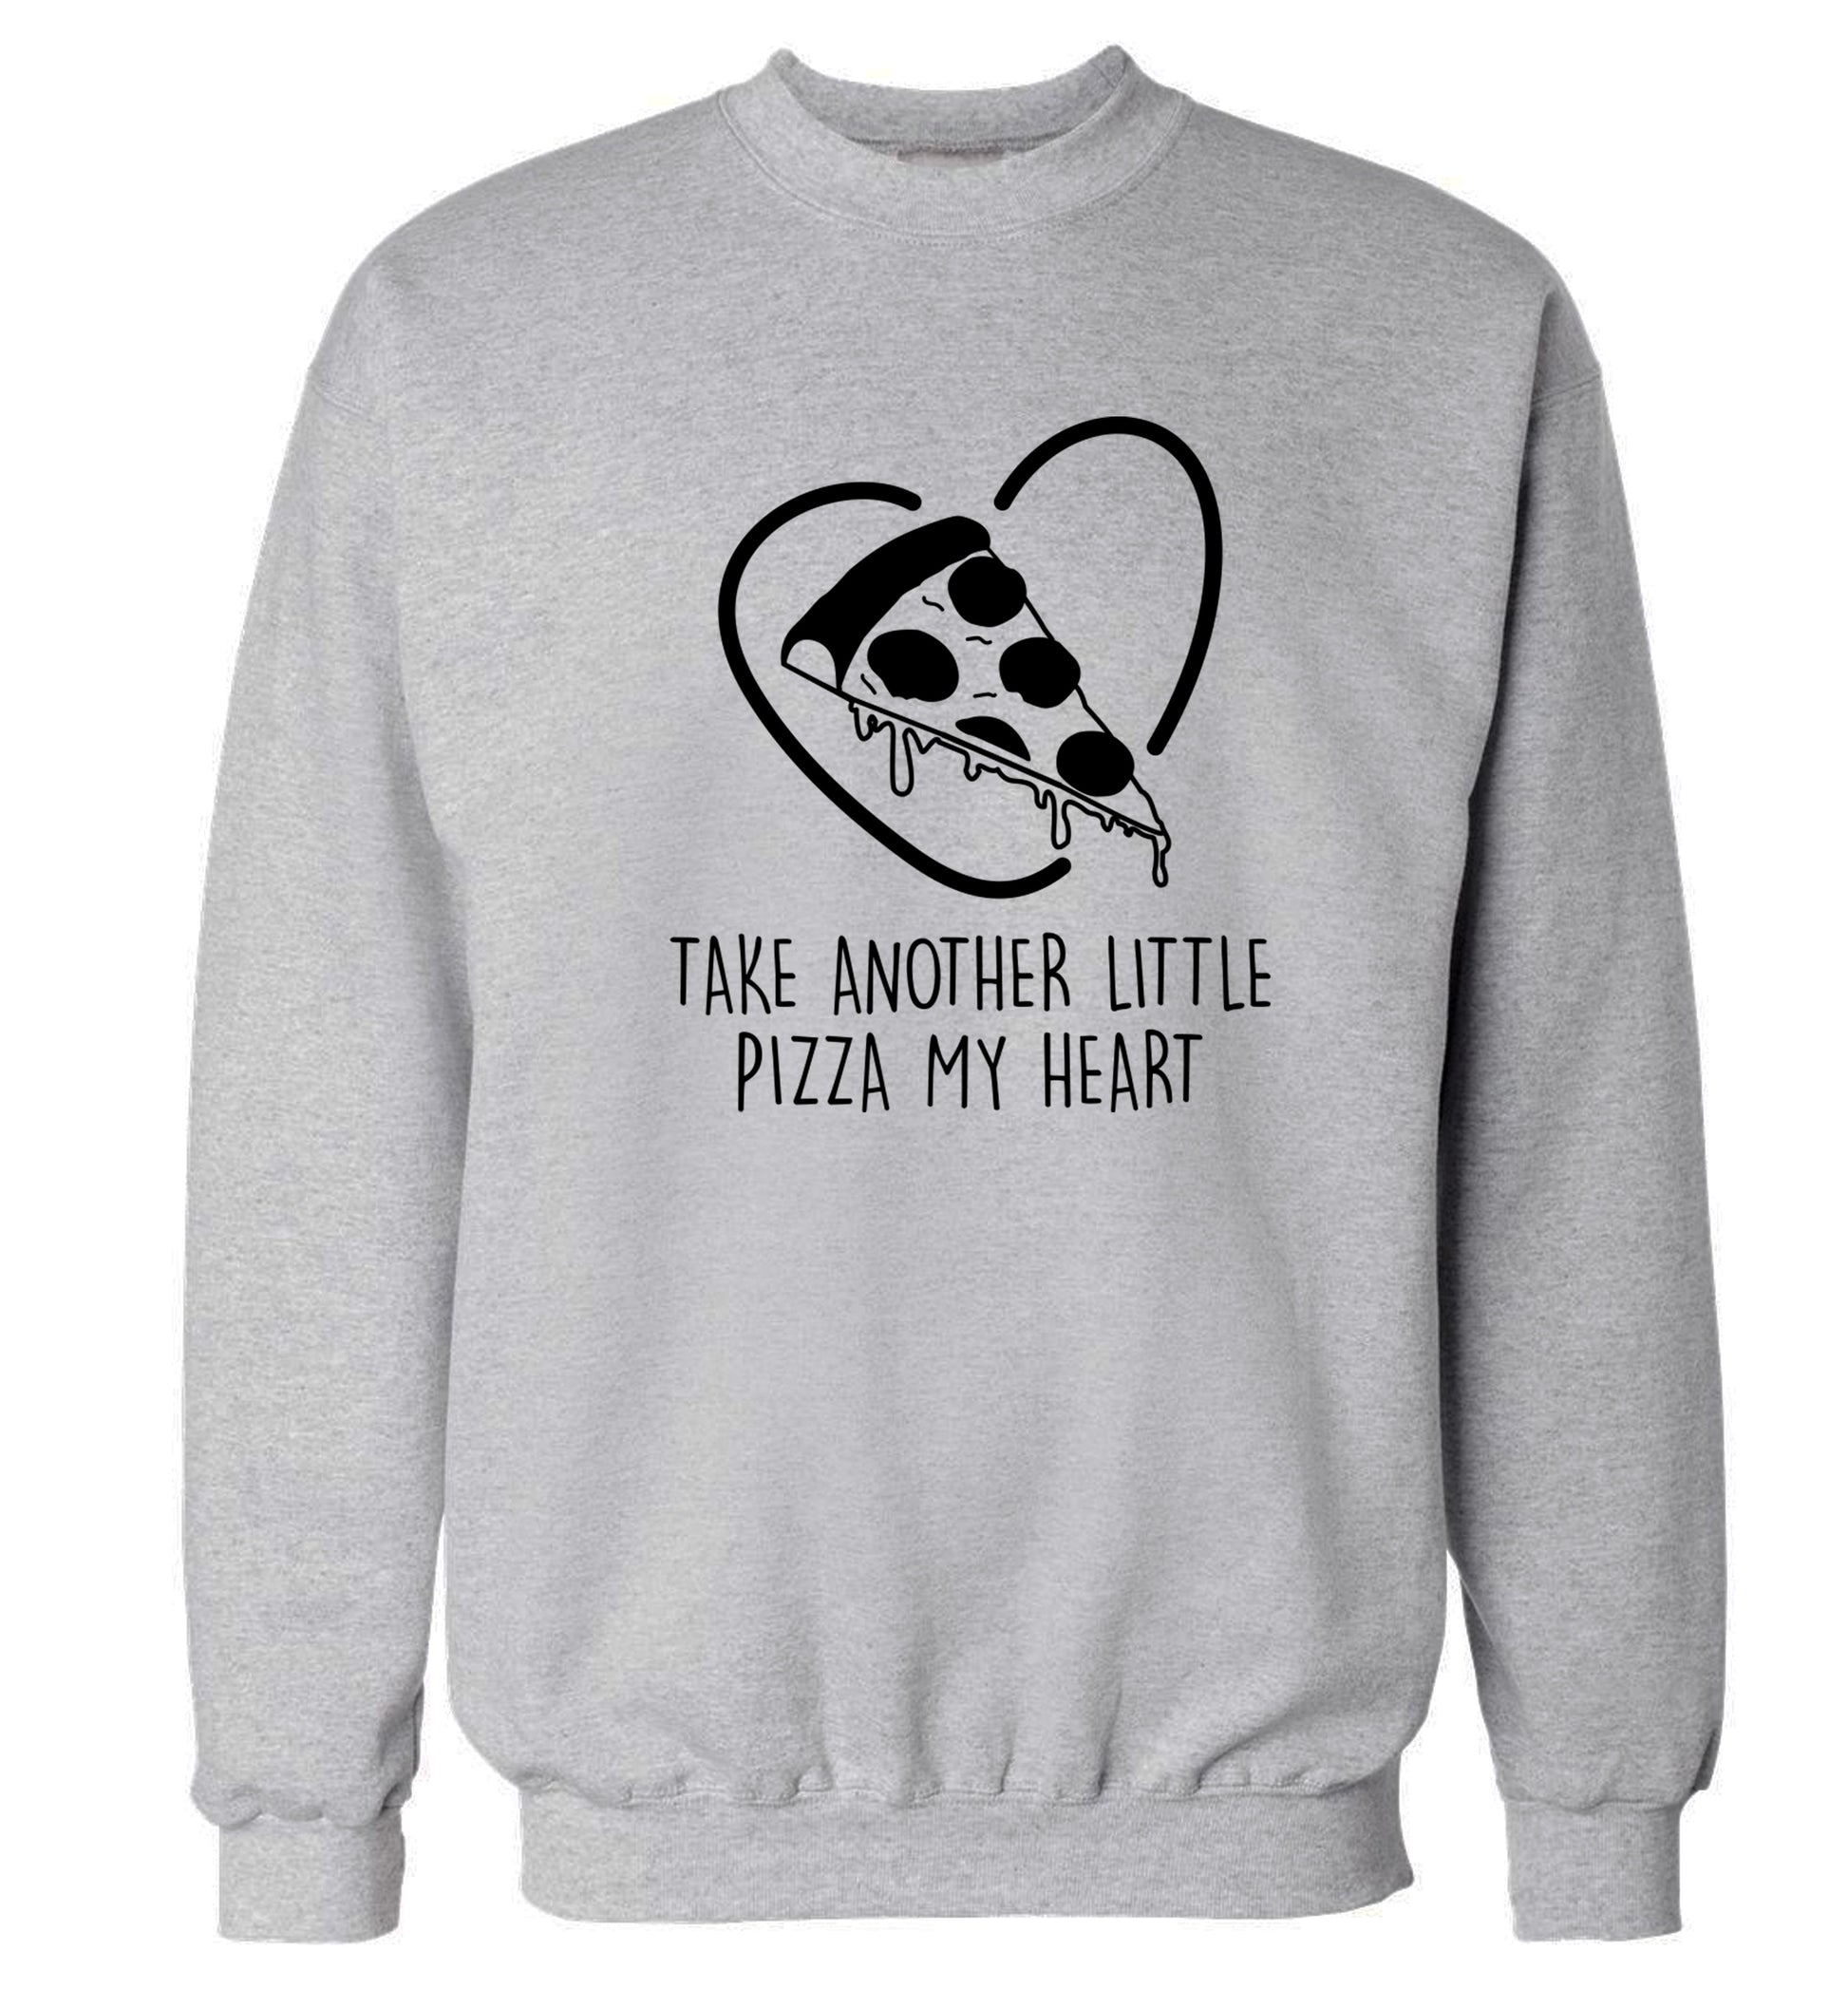 Take another little pizza my heart Adult's unisex grey Sweater 2XL